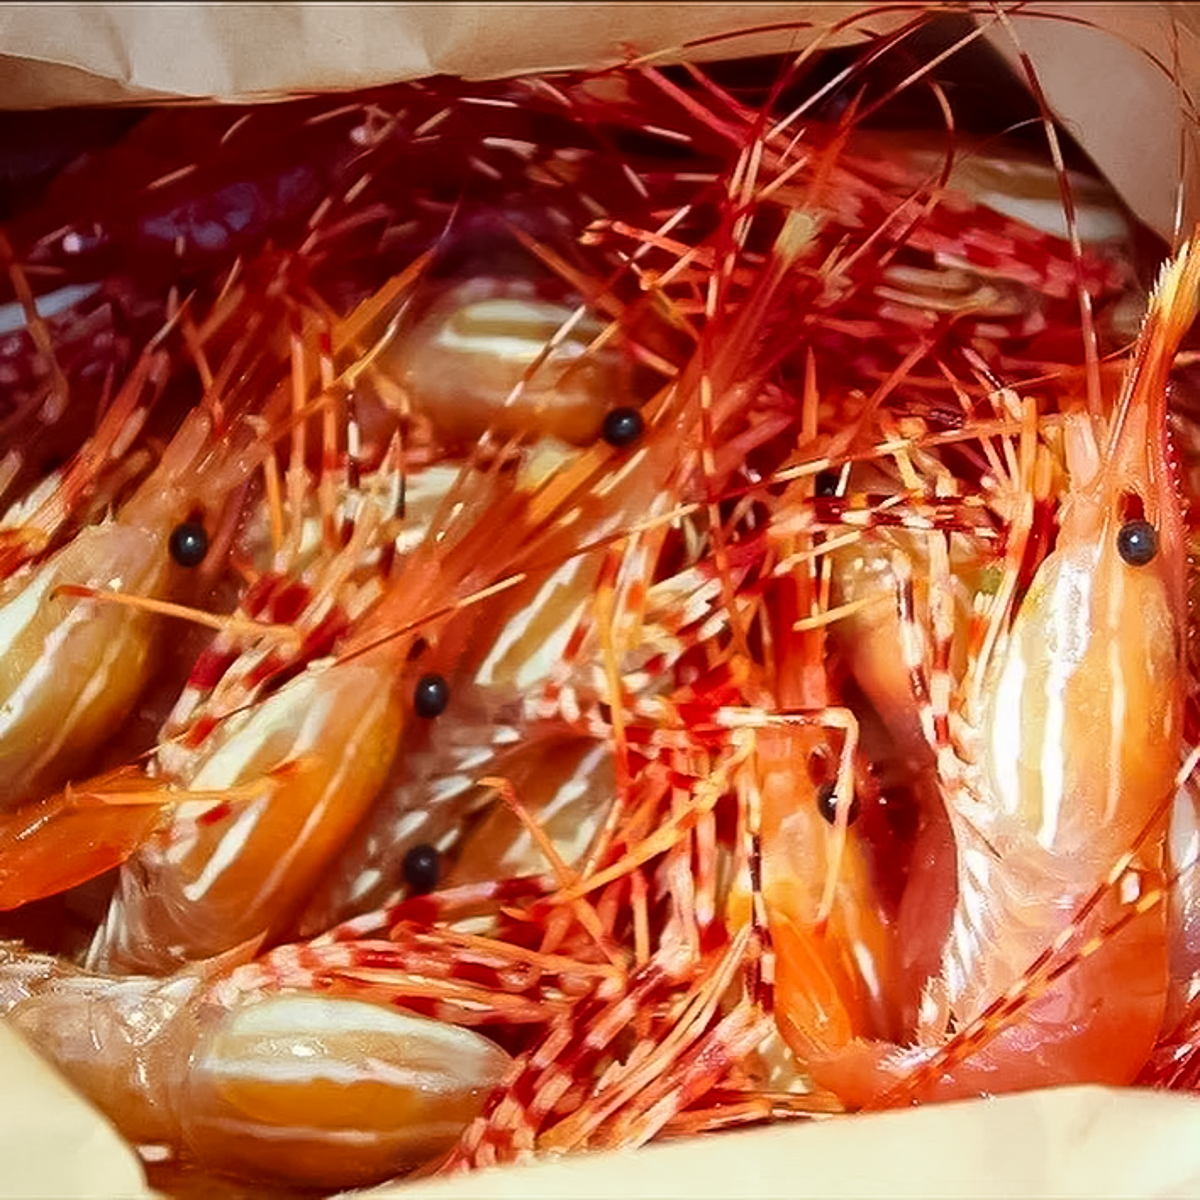 A brown paper bag open to show the fresh, live prawns. They are a bright red-orange color with distinctive white markings and black eyes.